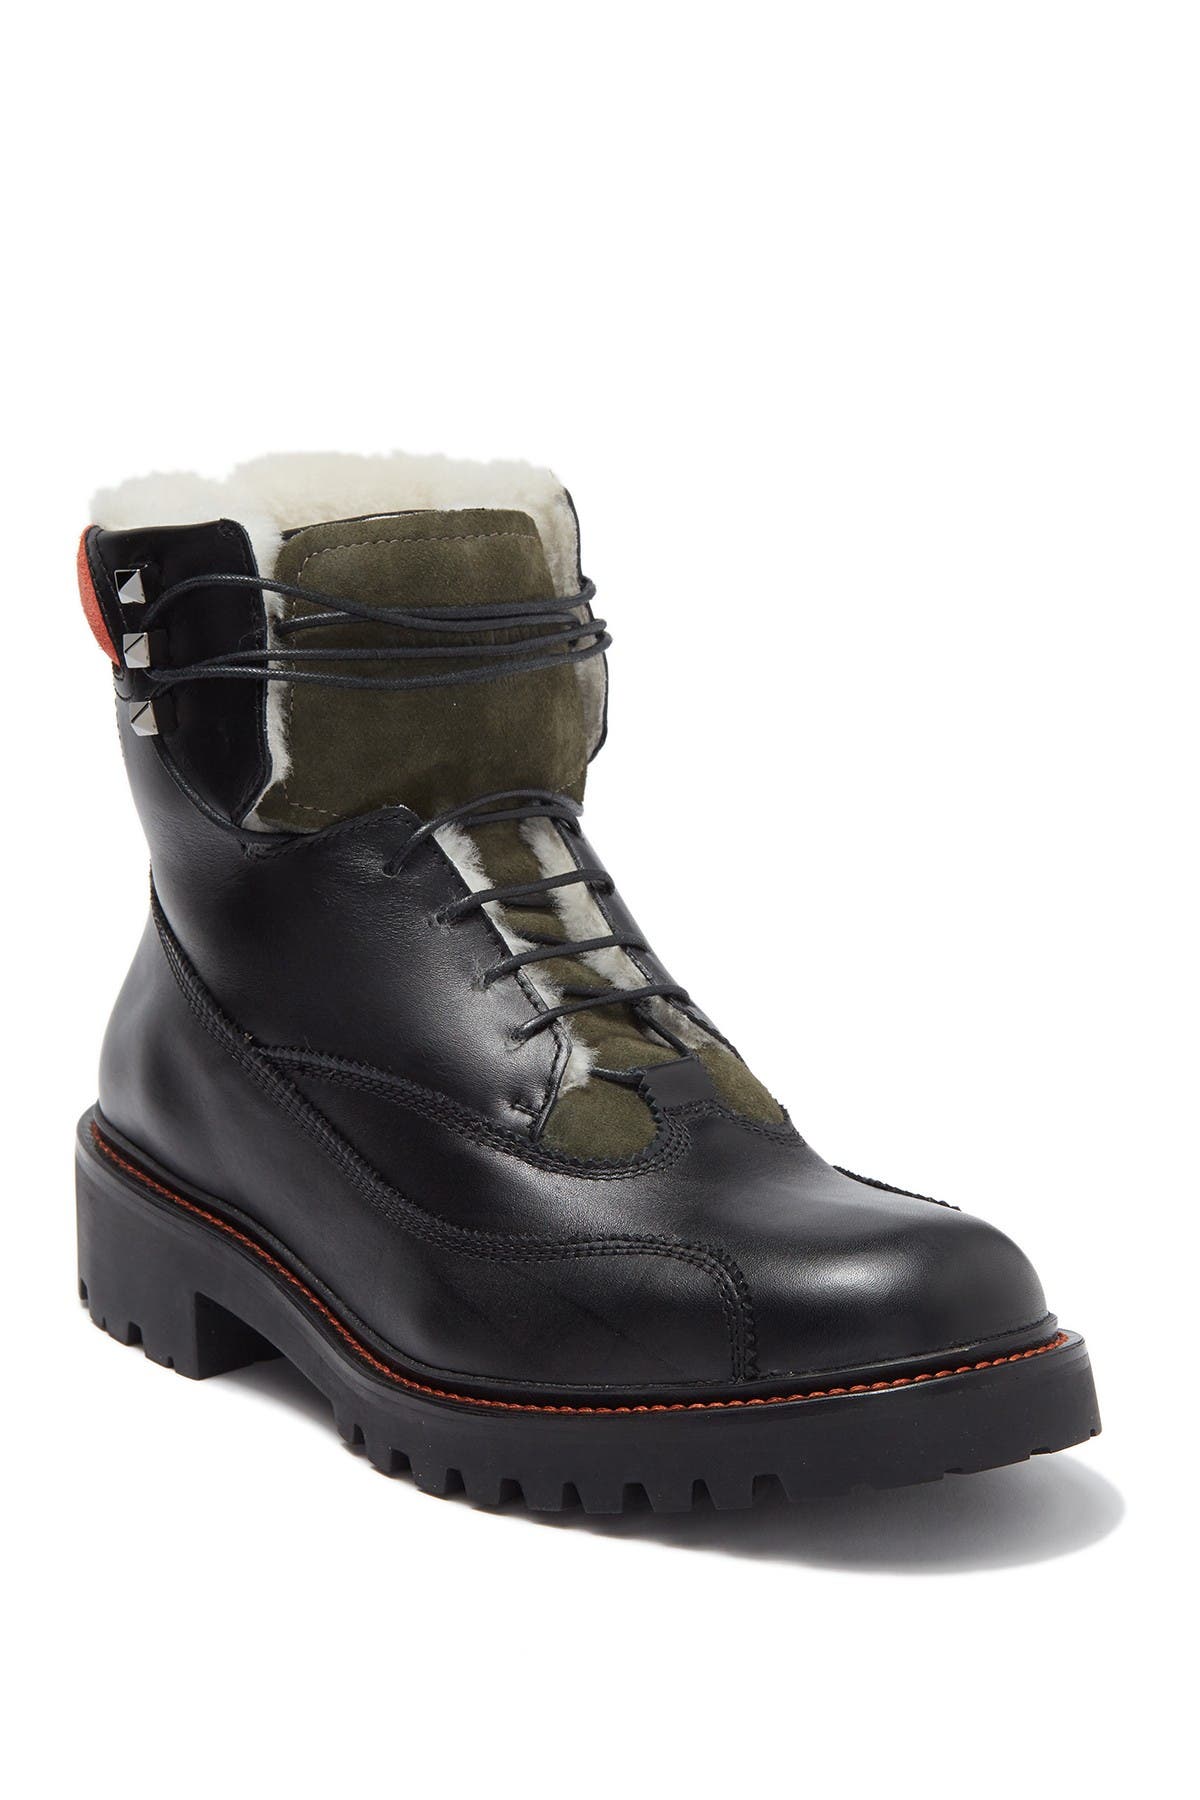 Valentino Garavani Shearling Lined Lace-up Combat Boot In Nero/olive/paprika